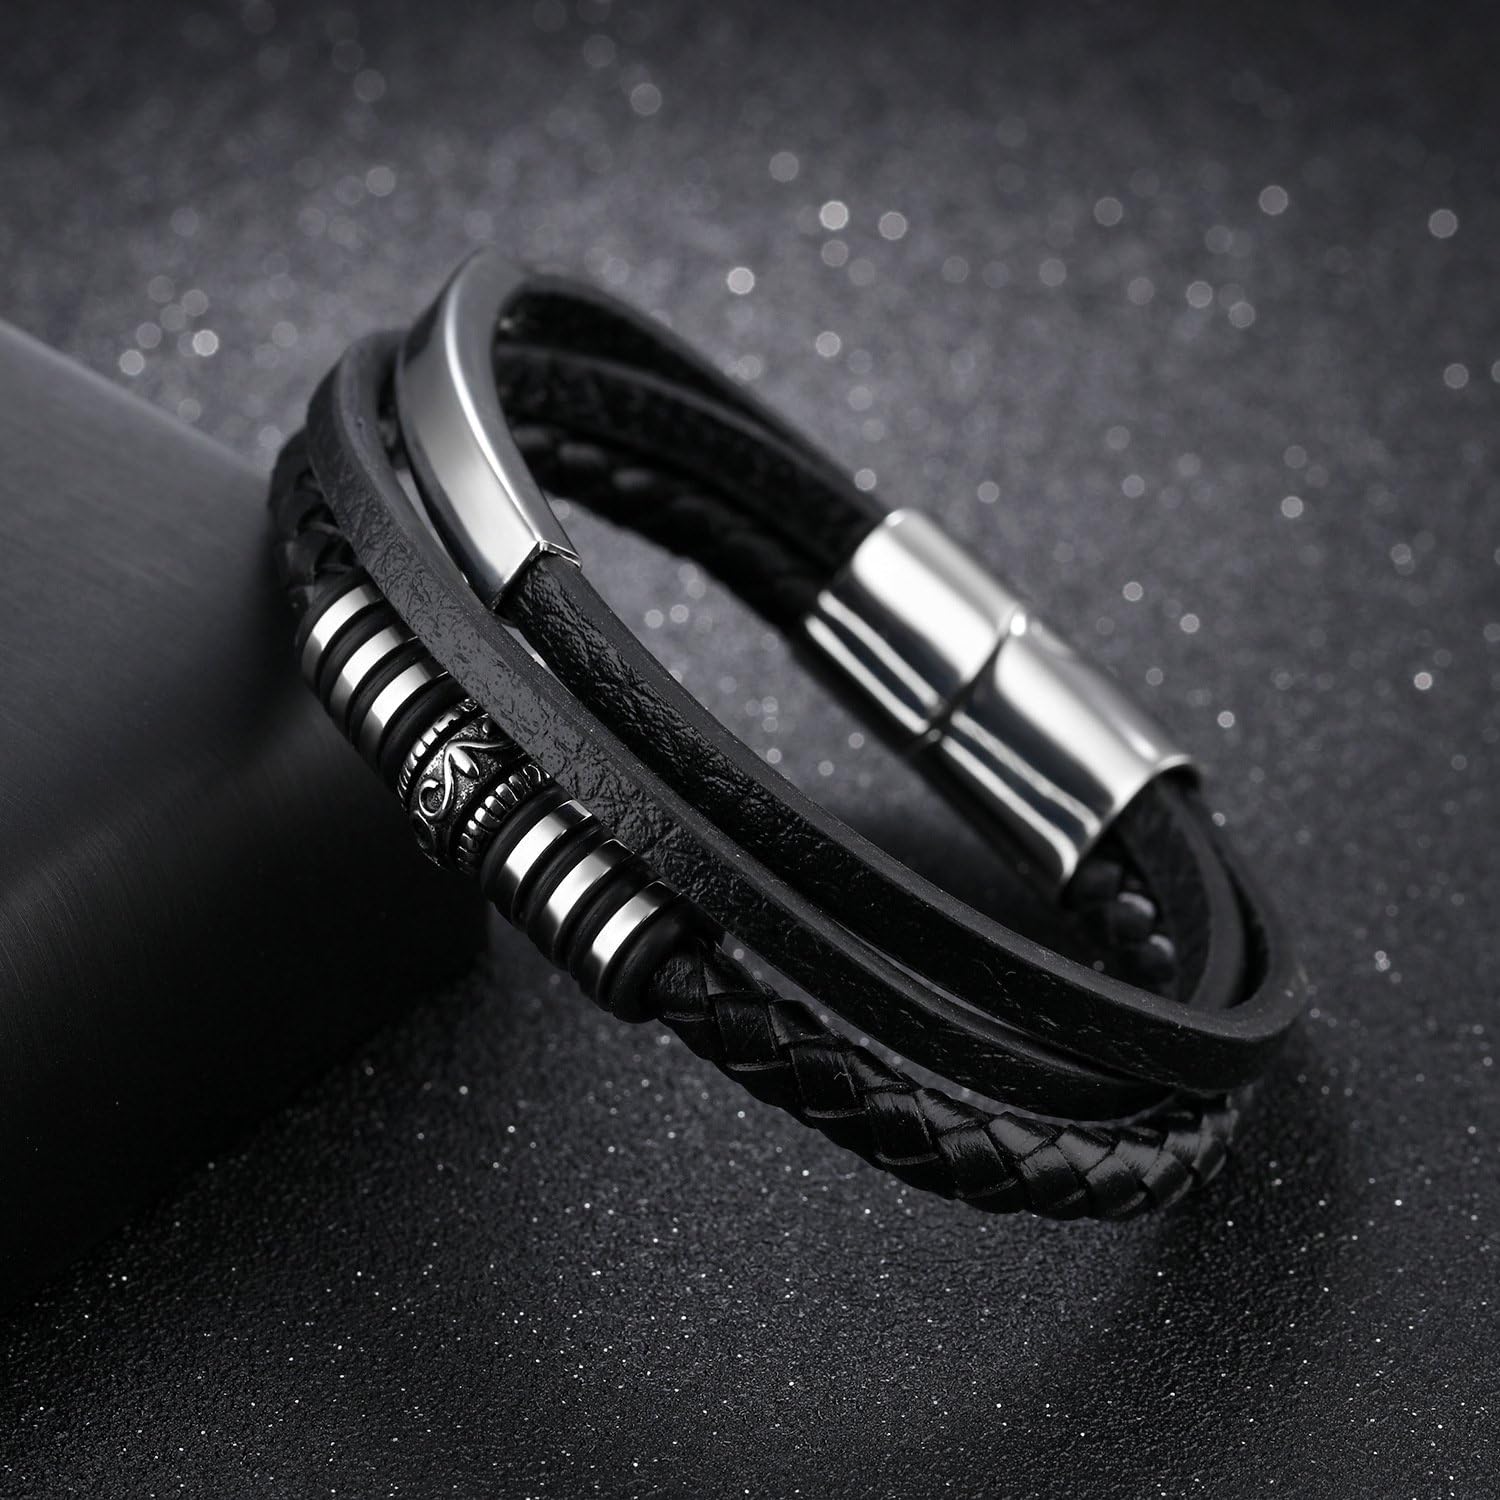 ORiTi Mens Leather Bracelet Premium Braided Leather Bracelet for Men and Women with Stainless Steel Magnetic Clasp Braided Bracelets for Men Leather Cuff Boys Bracelet